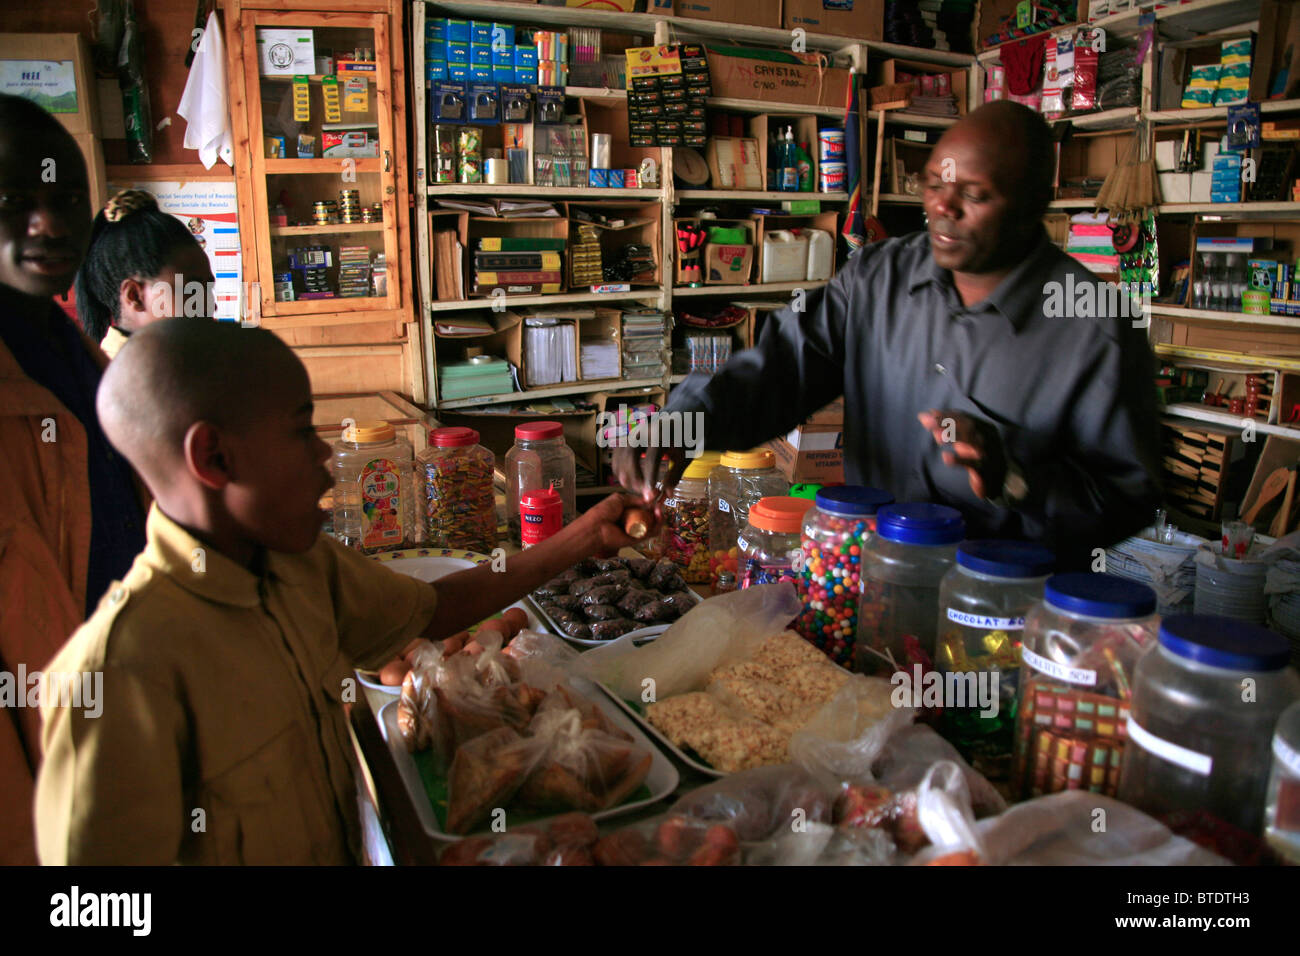 A young boy buying sweets at a small general store in the town Stock Photo